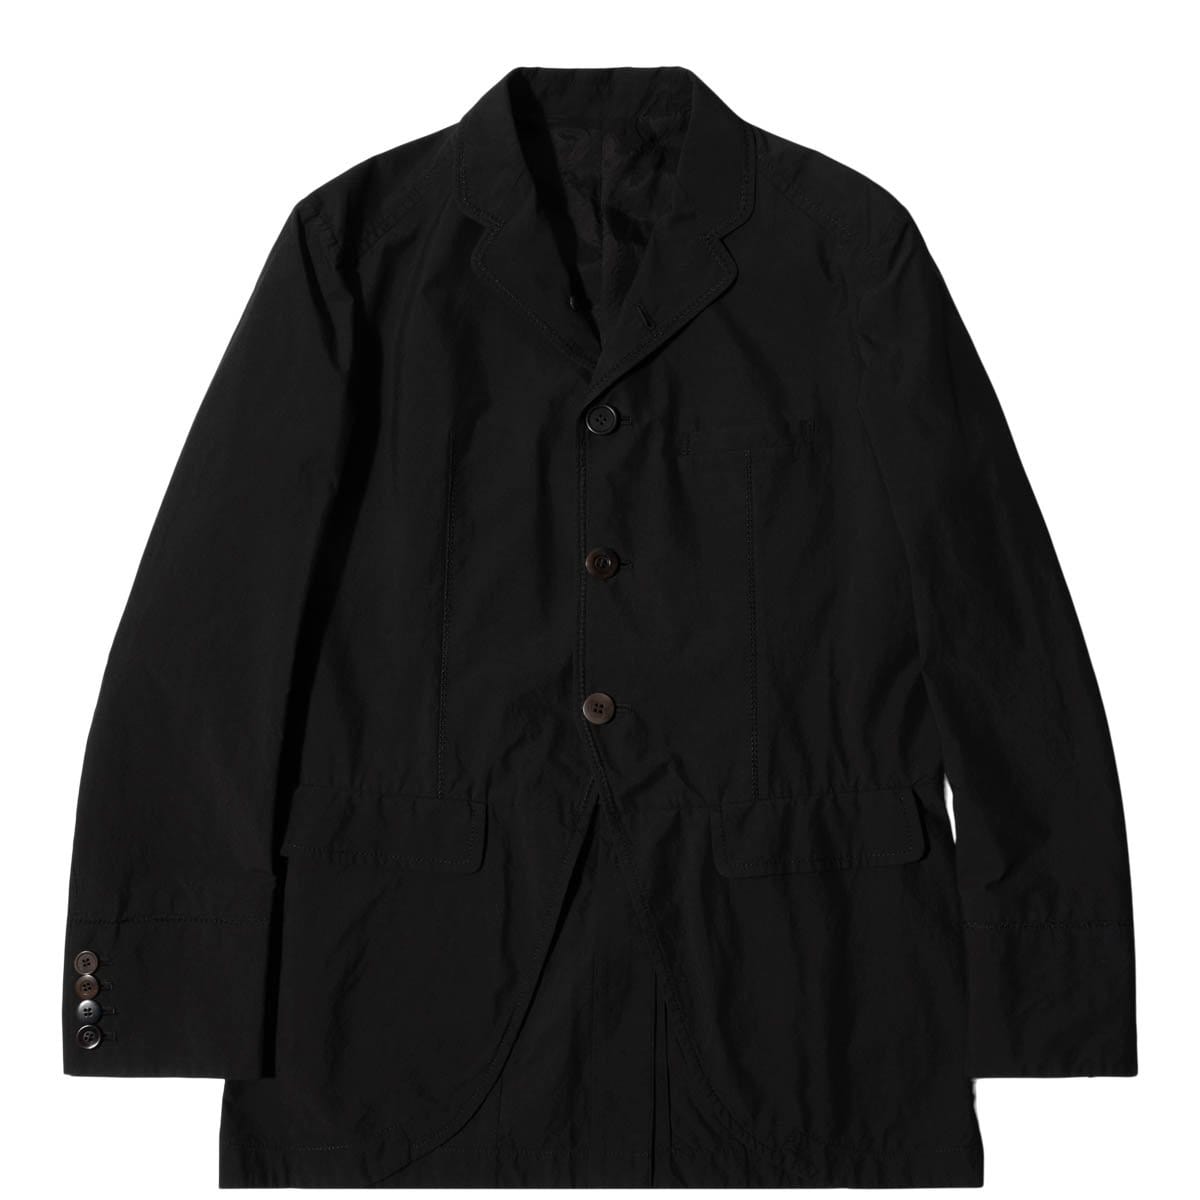 Undercover Outerwear UC1A4101-3 JACKET